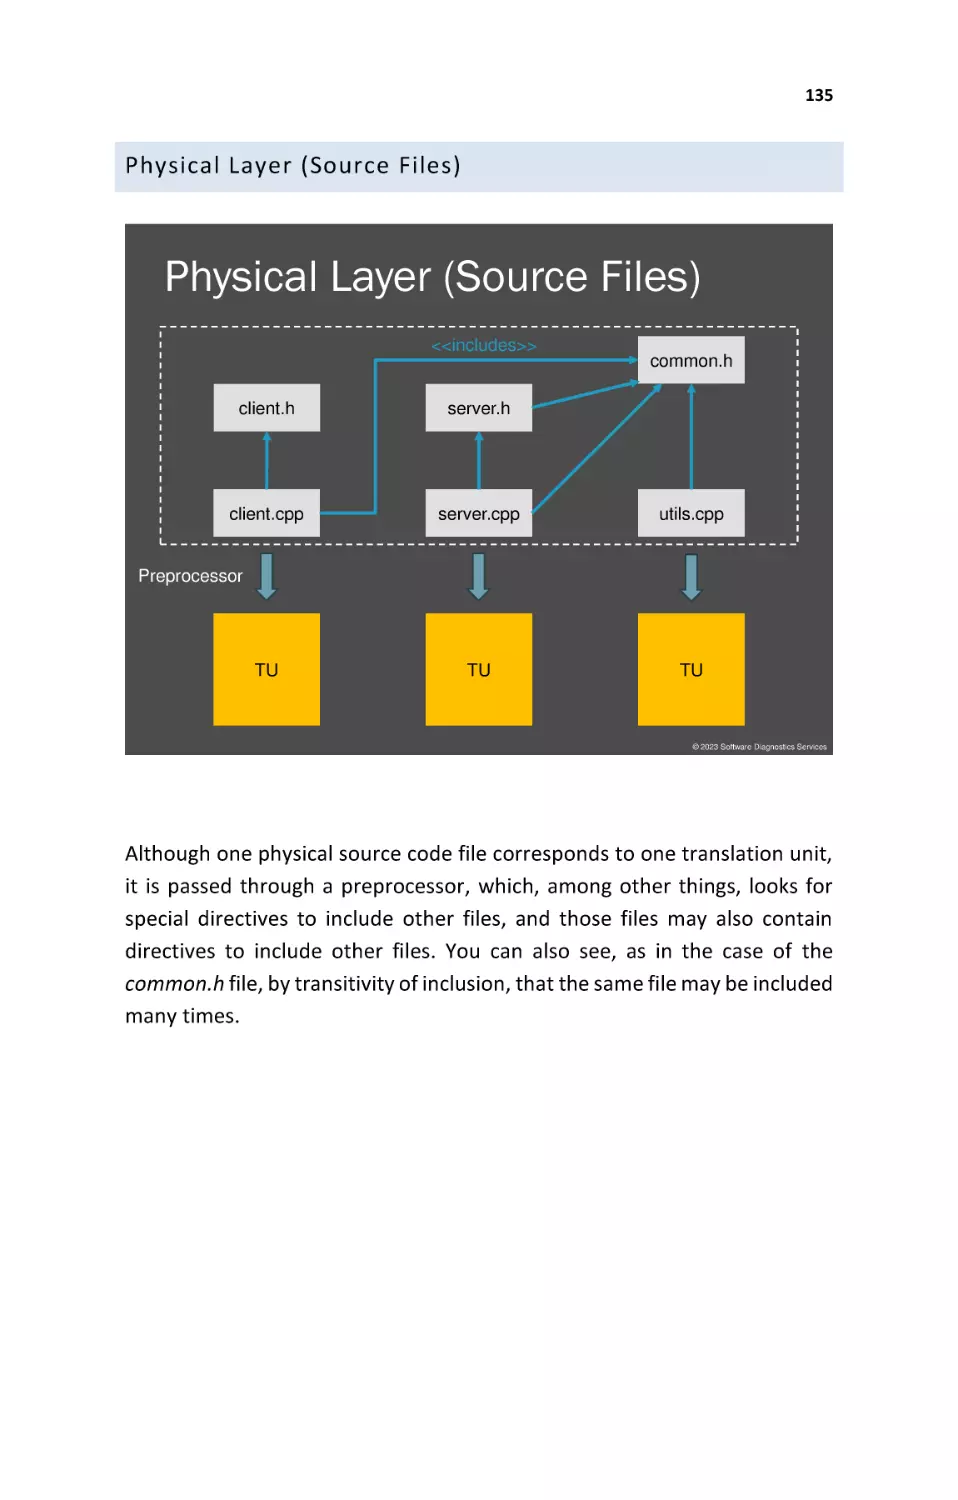 Physical Layer (Source Files)